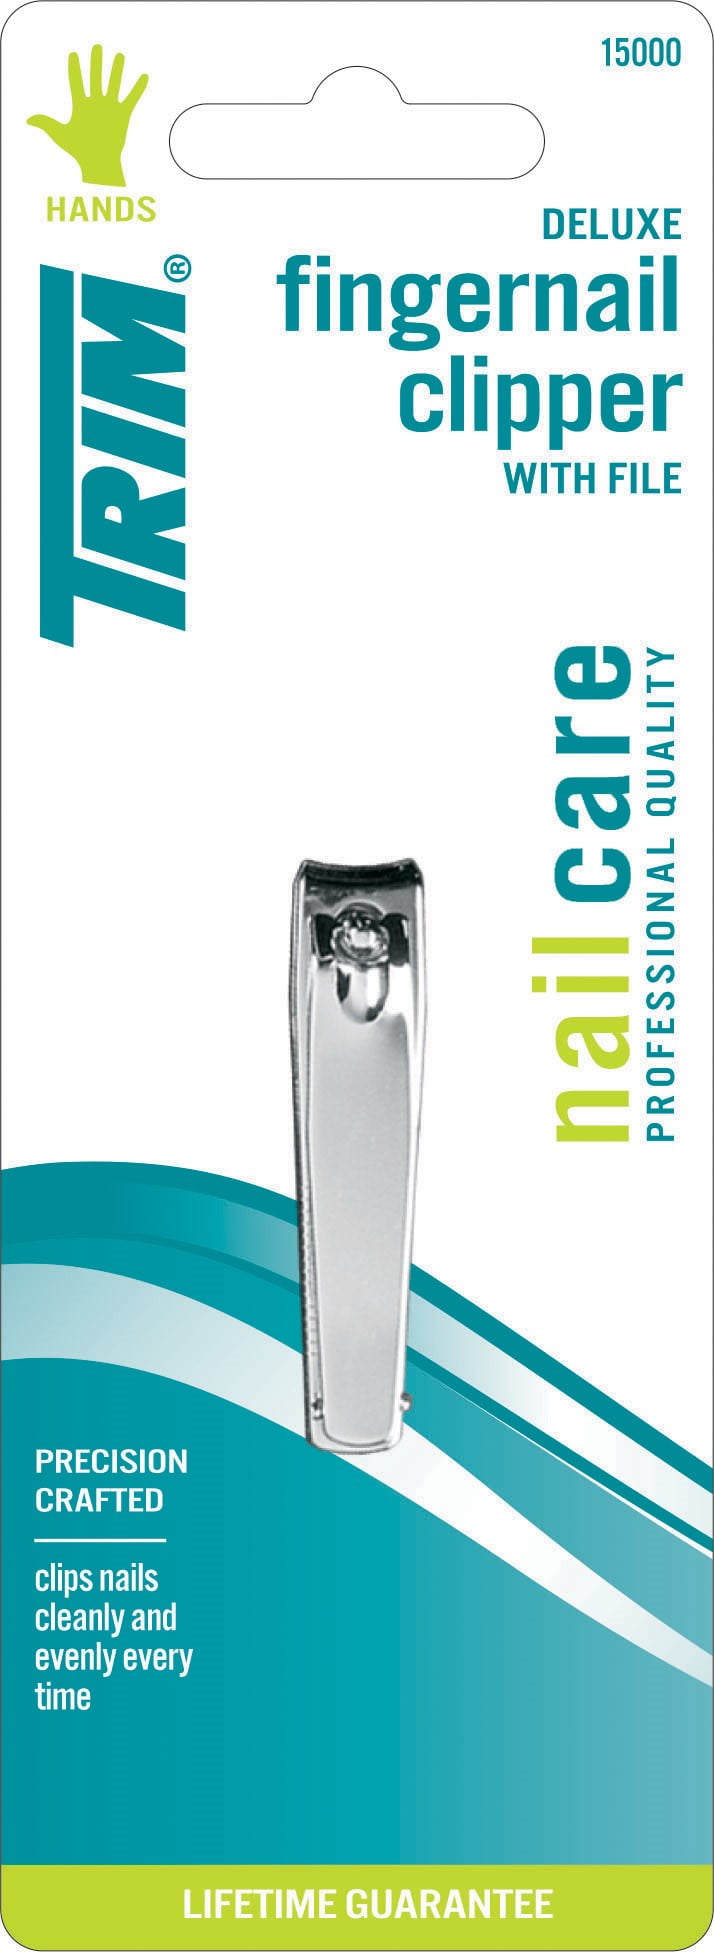 Save on CareOne Deluxe Fingernail Clippers with File Order Online Delivery